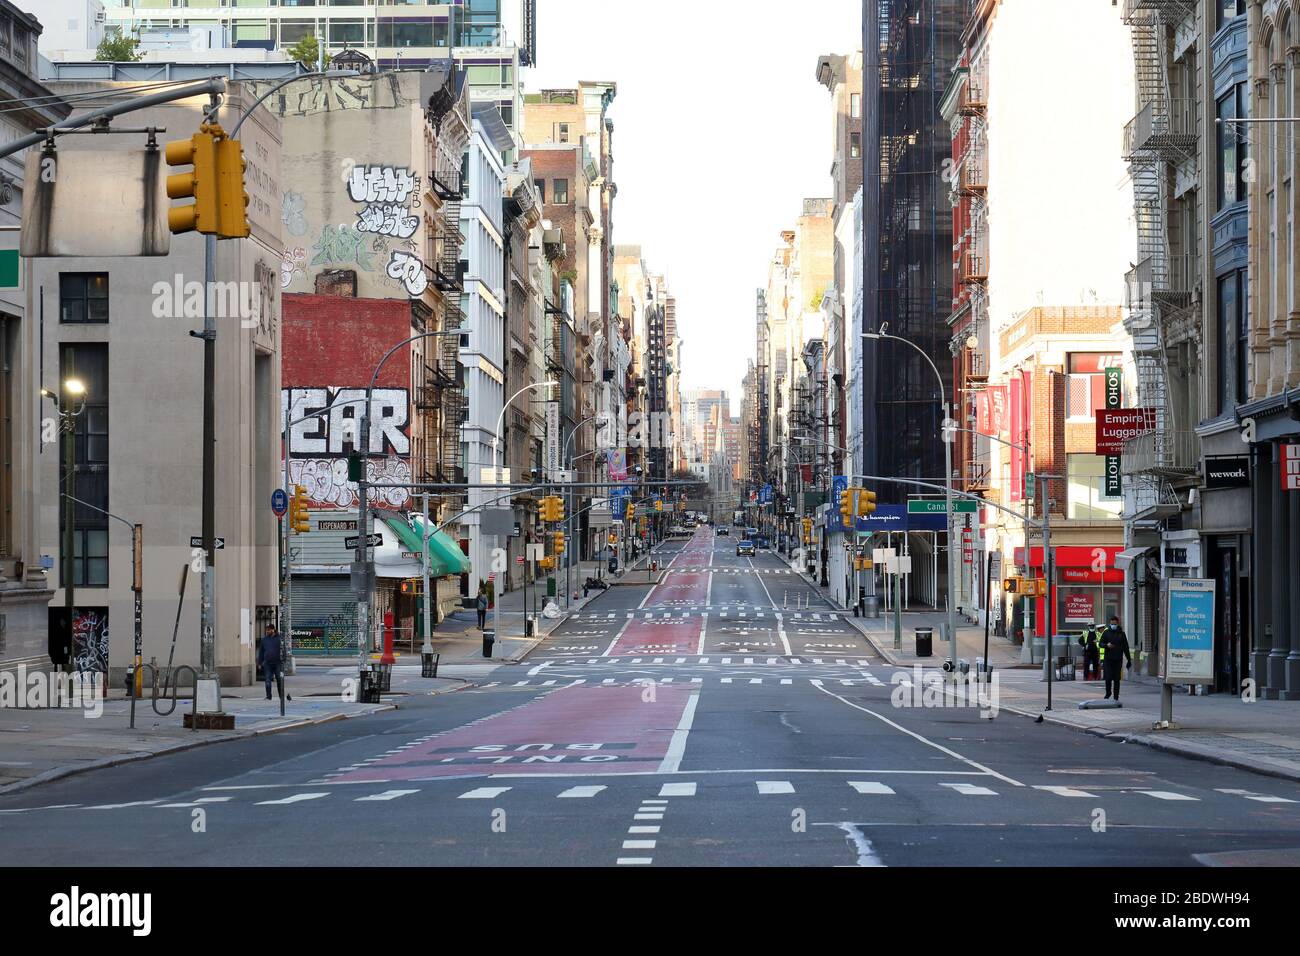 New York, NY, 9th April 2020, 18h15.  Downtown Broadway largely empty of rush hour traffic and people... SEE MORE INFO FOR FULL CAPTION. Stock Photo